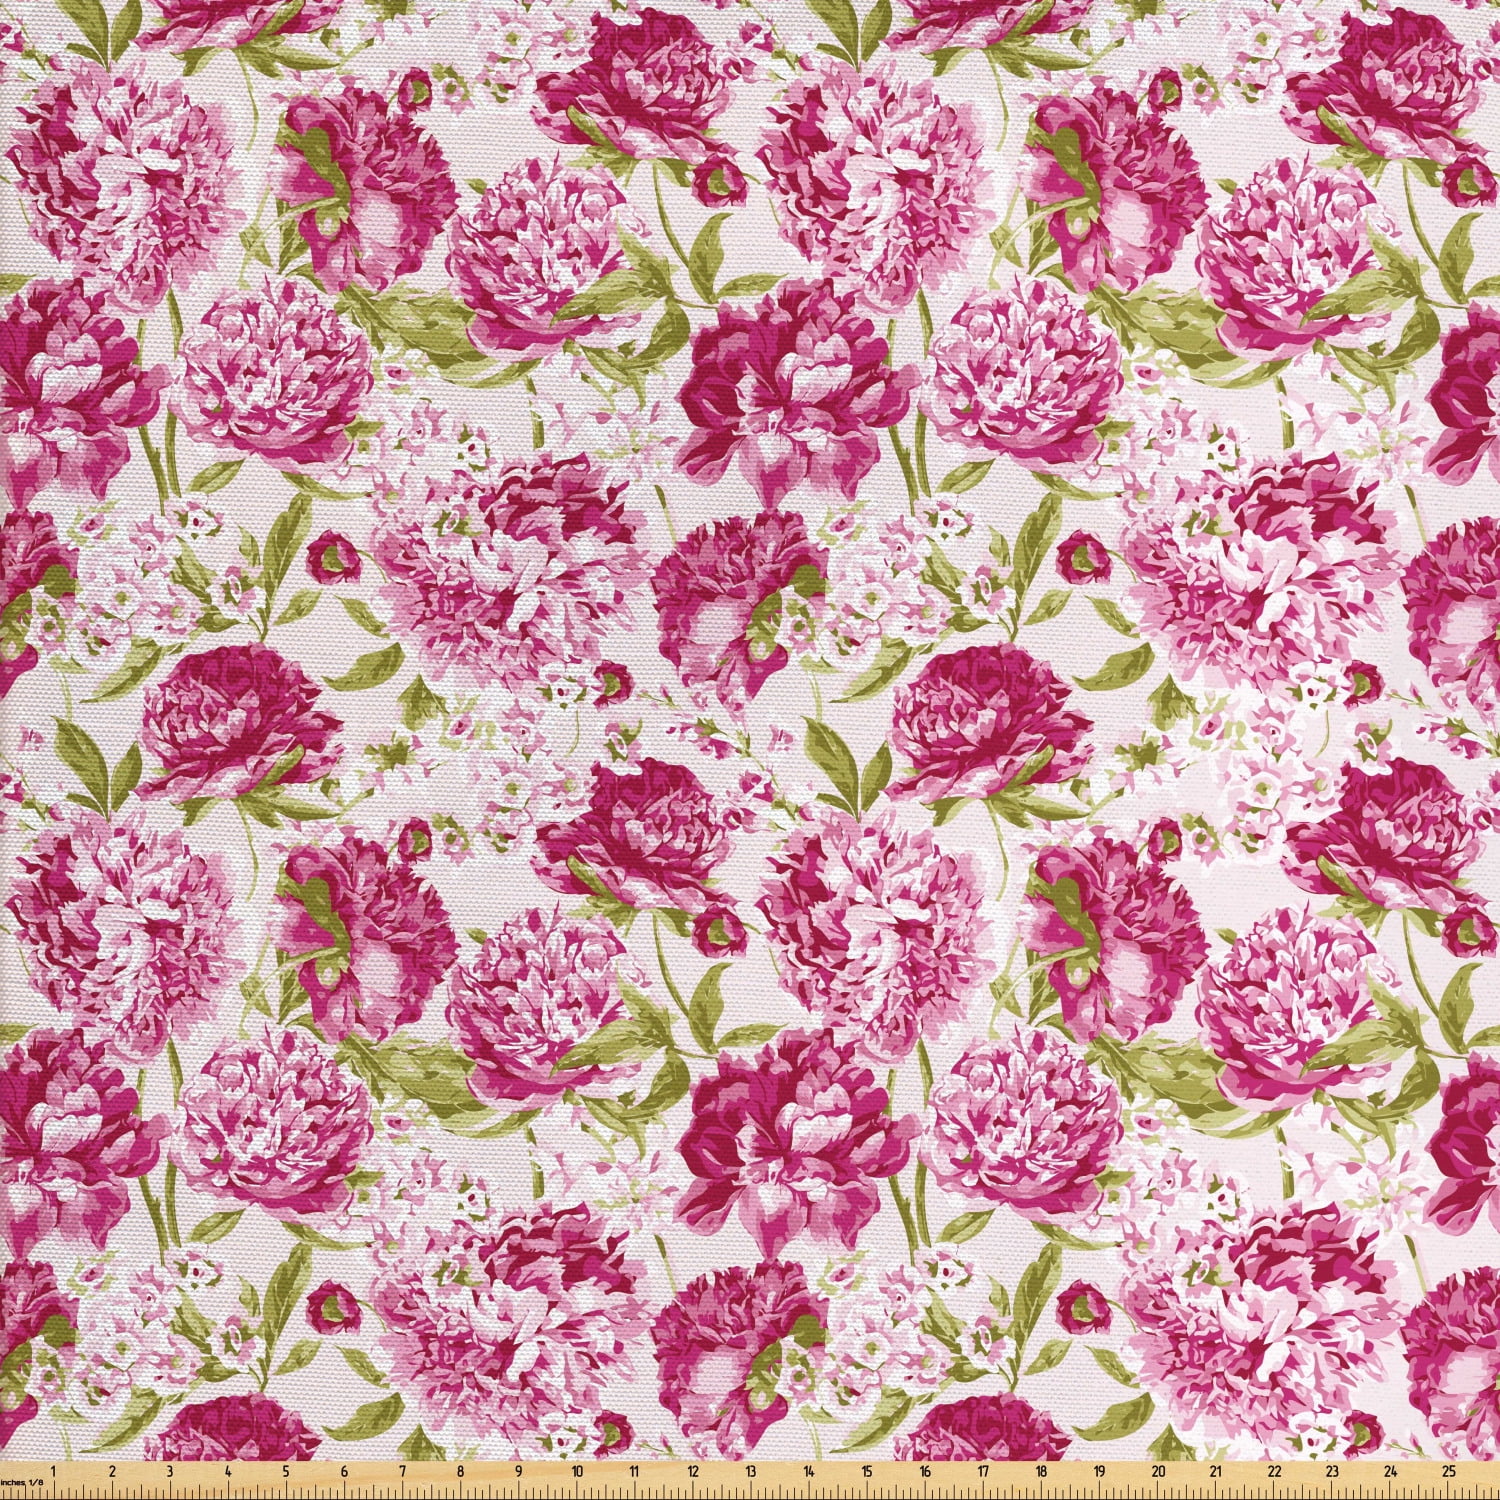 Japanese Flower Spring Pink Peony 35 x 24 Small Area Rugs Floral Kitchen Rugs Area Carpet